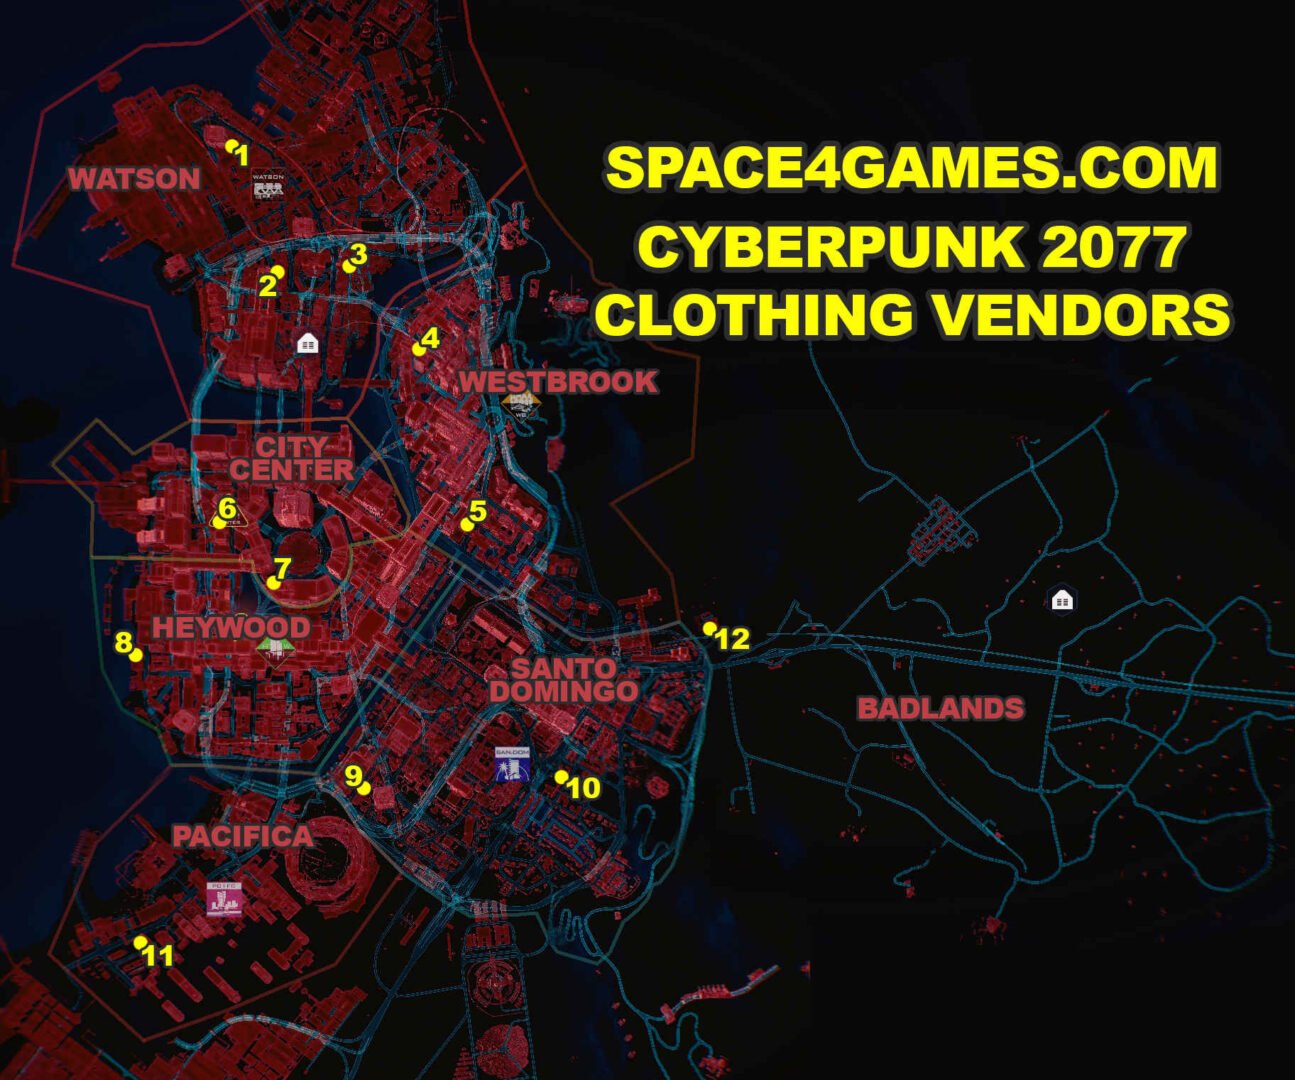 Cyberpunk 2077 Clothing Guide Map of Night City with all 12 Clothing Vendors in the districts.